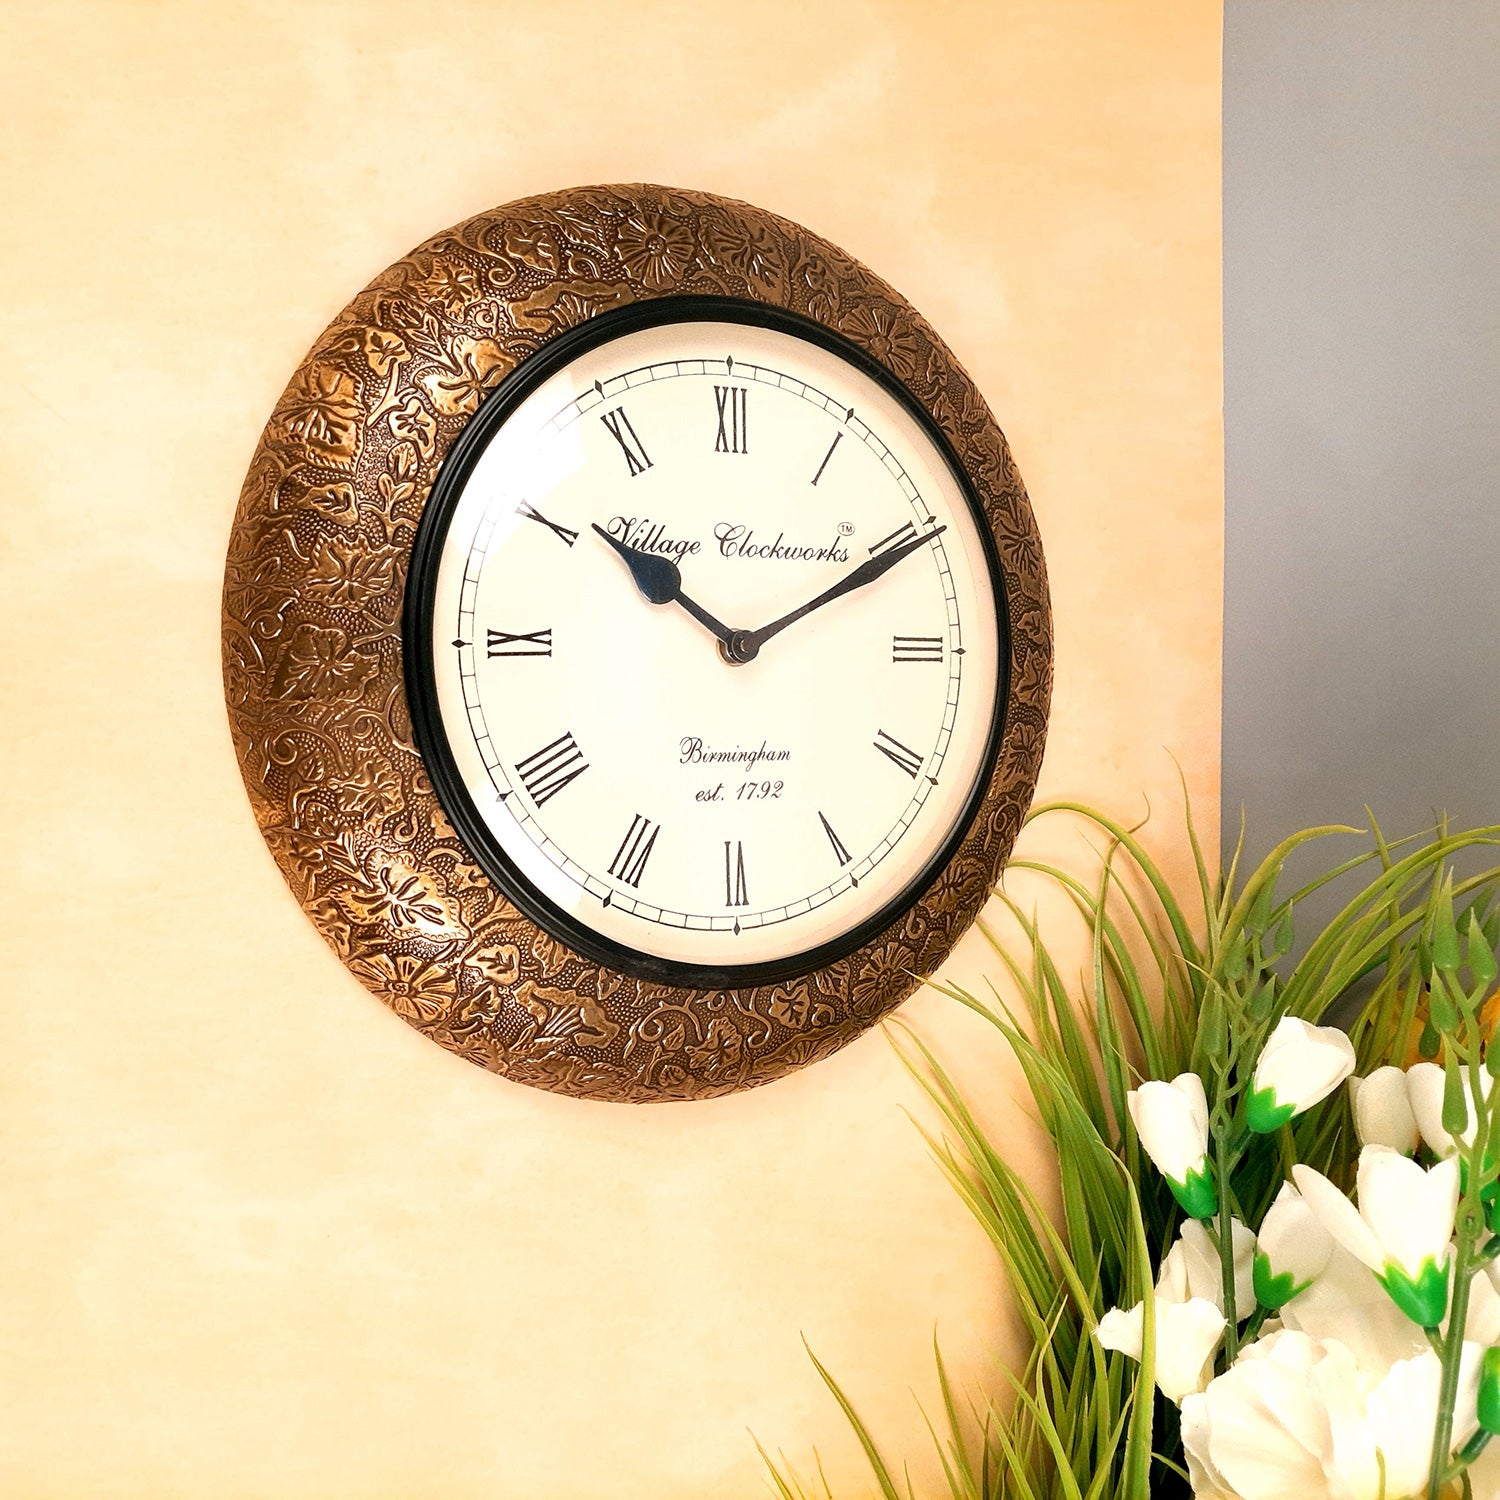 Wall Clock | Wall Mount Analogue Clock Antique With Brass Work - For Home, Living Room, Bedroom, Hall Decor | Wedding & Housewarming Gift - 12 Inch - Apkamart